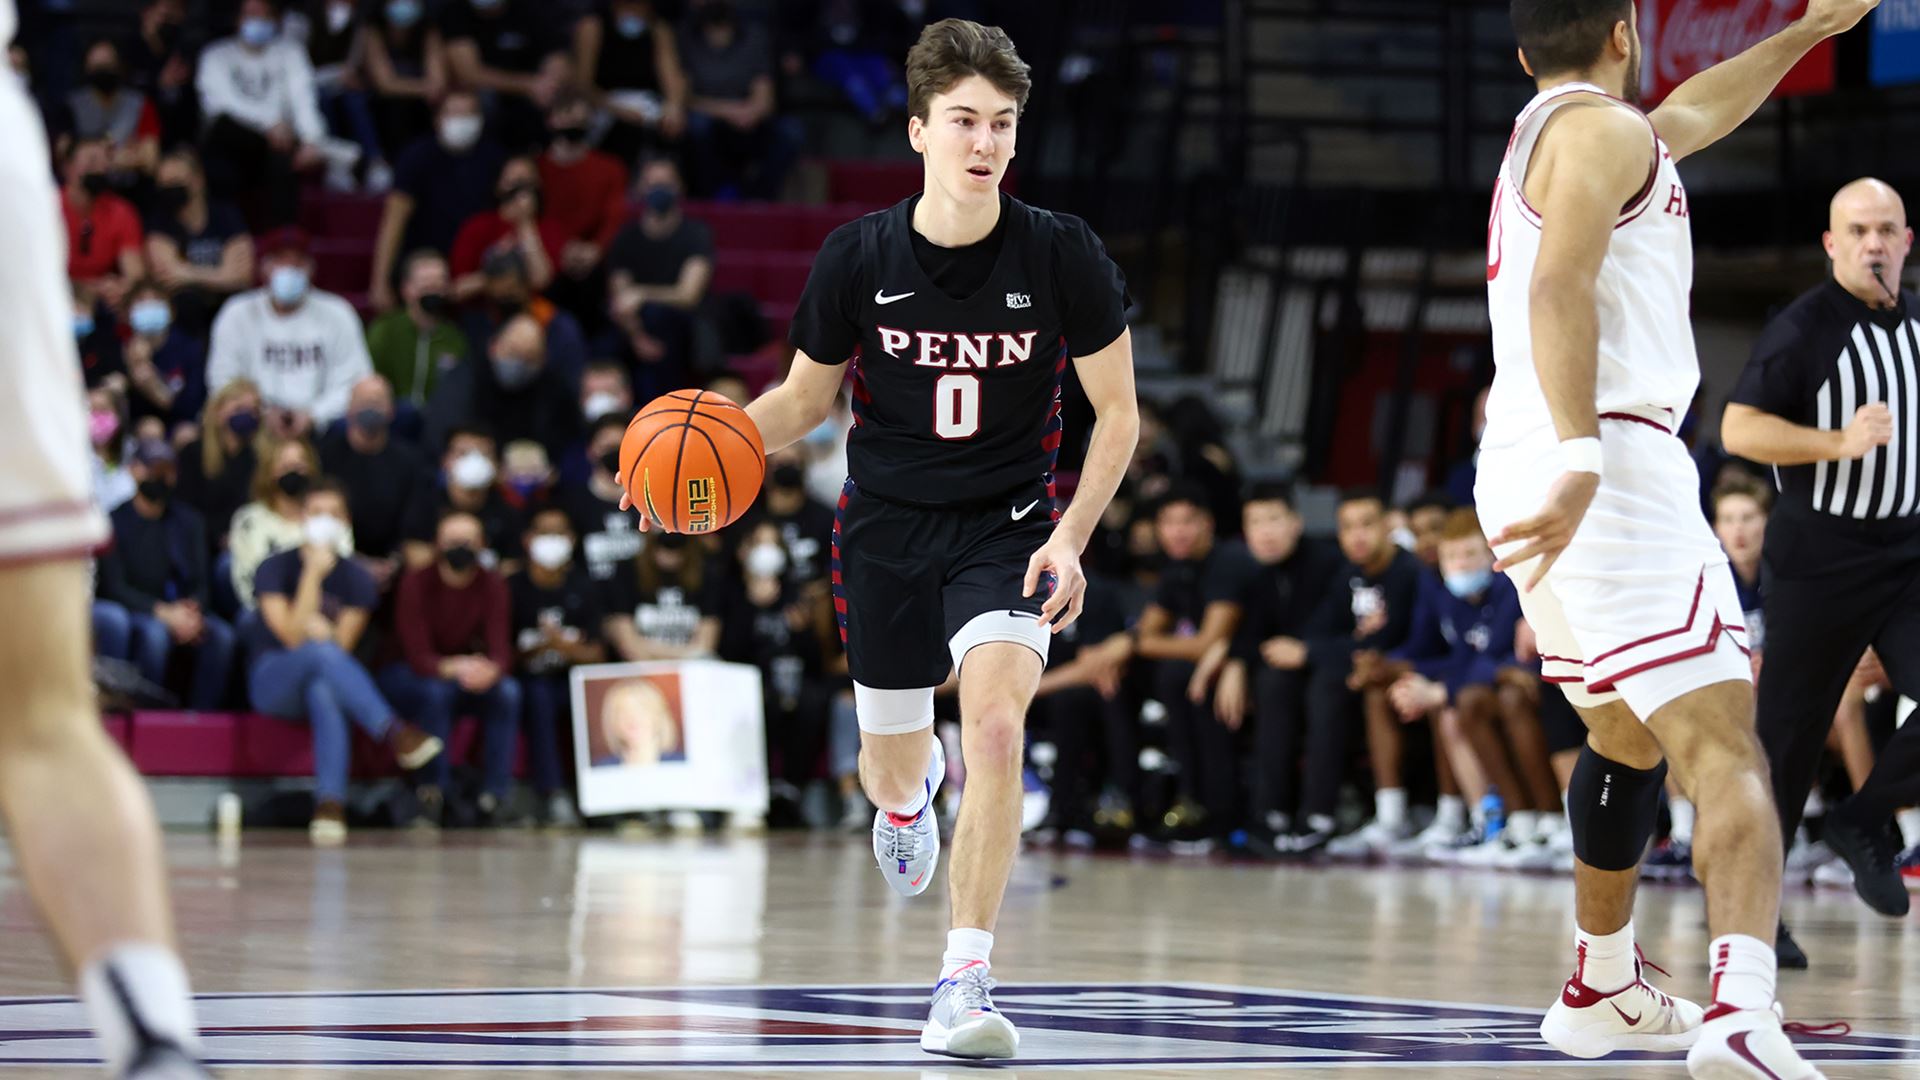 Slajchert dribbles the ball up the court against Harvard at the Palestra.